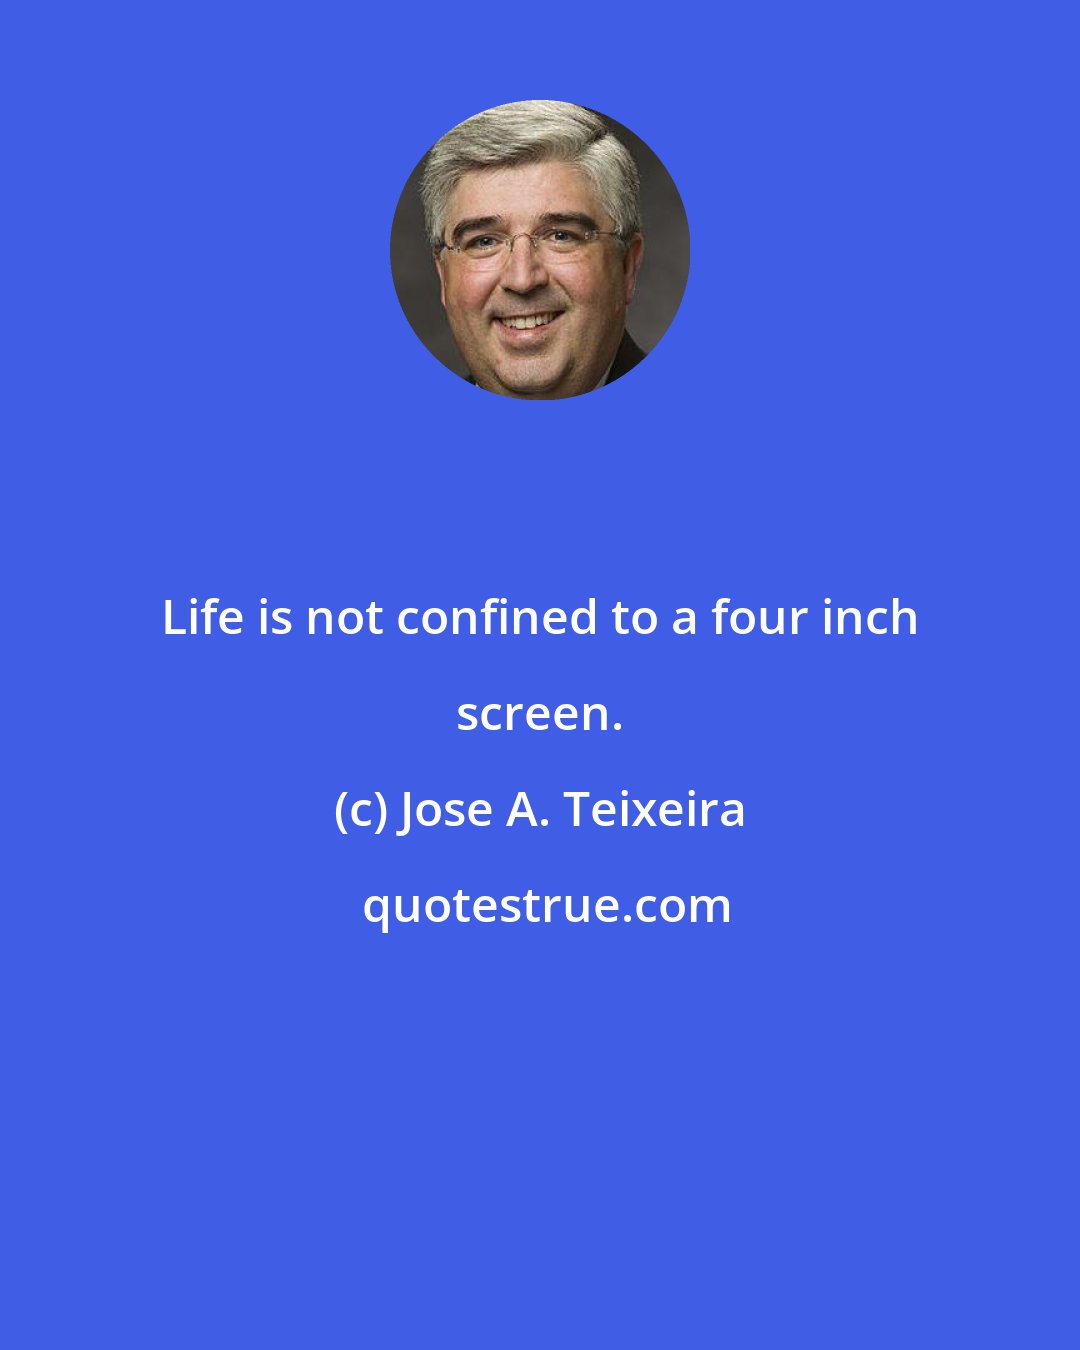 Jose A. Teixeira: Life is not confined to a four inch screen.